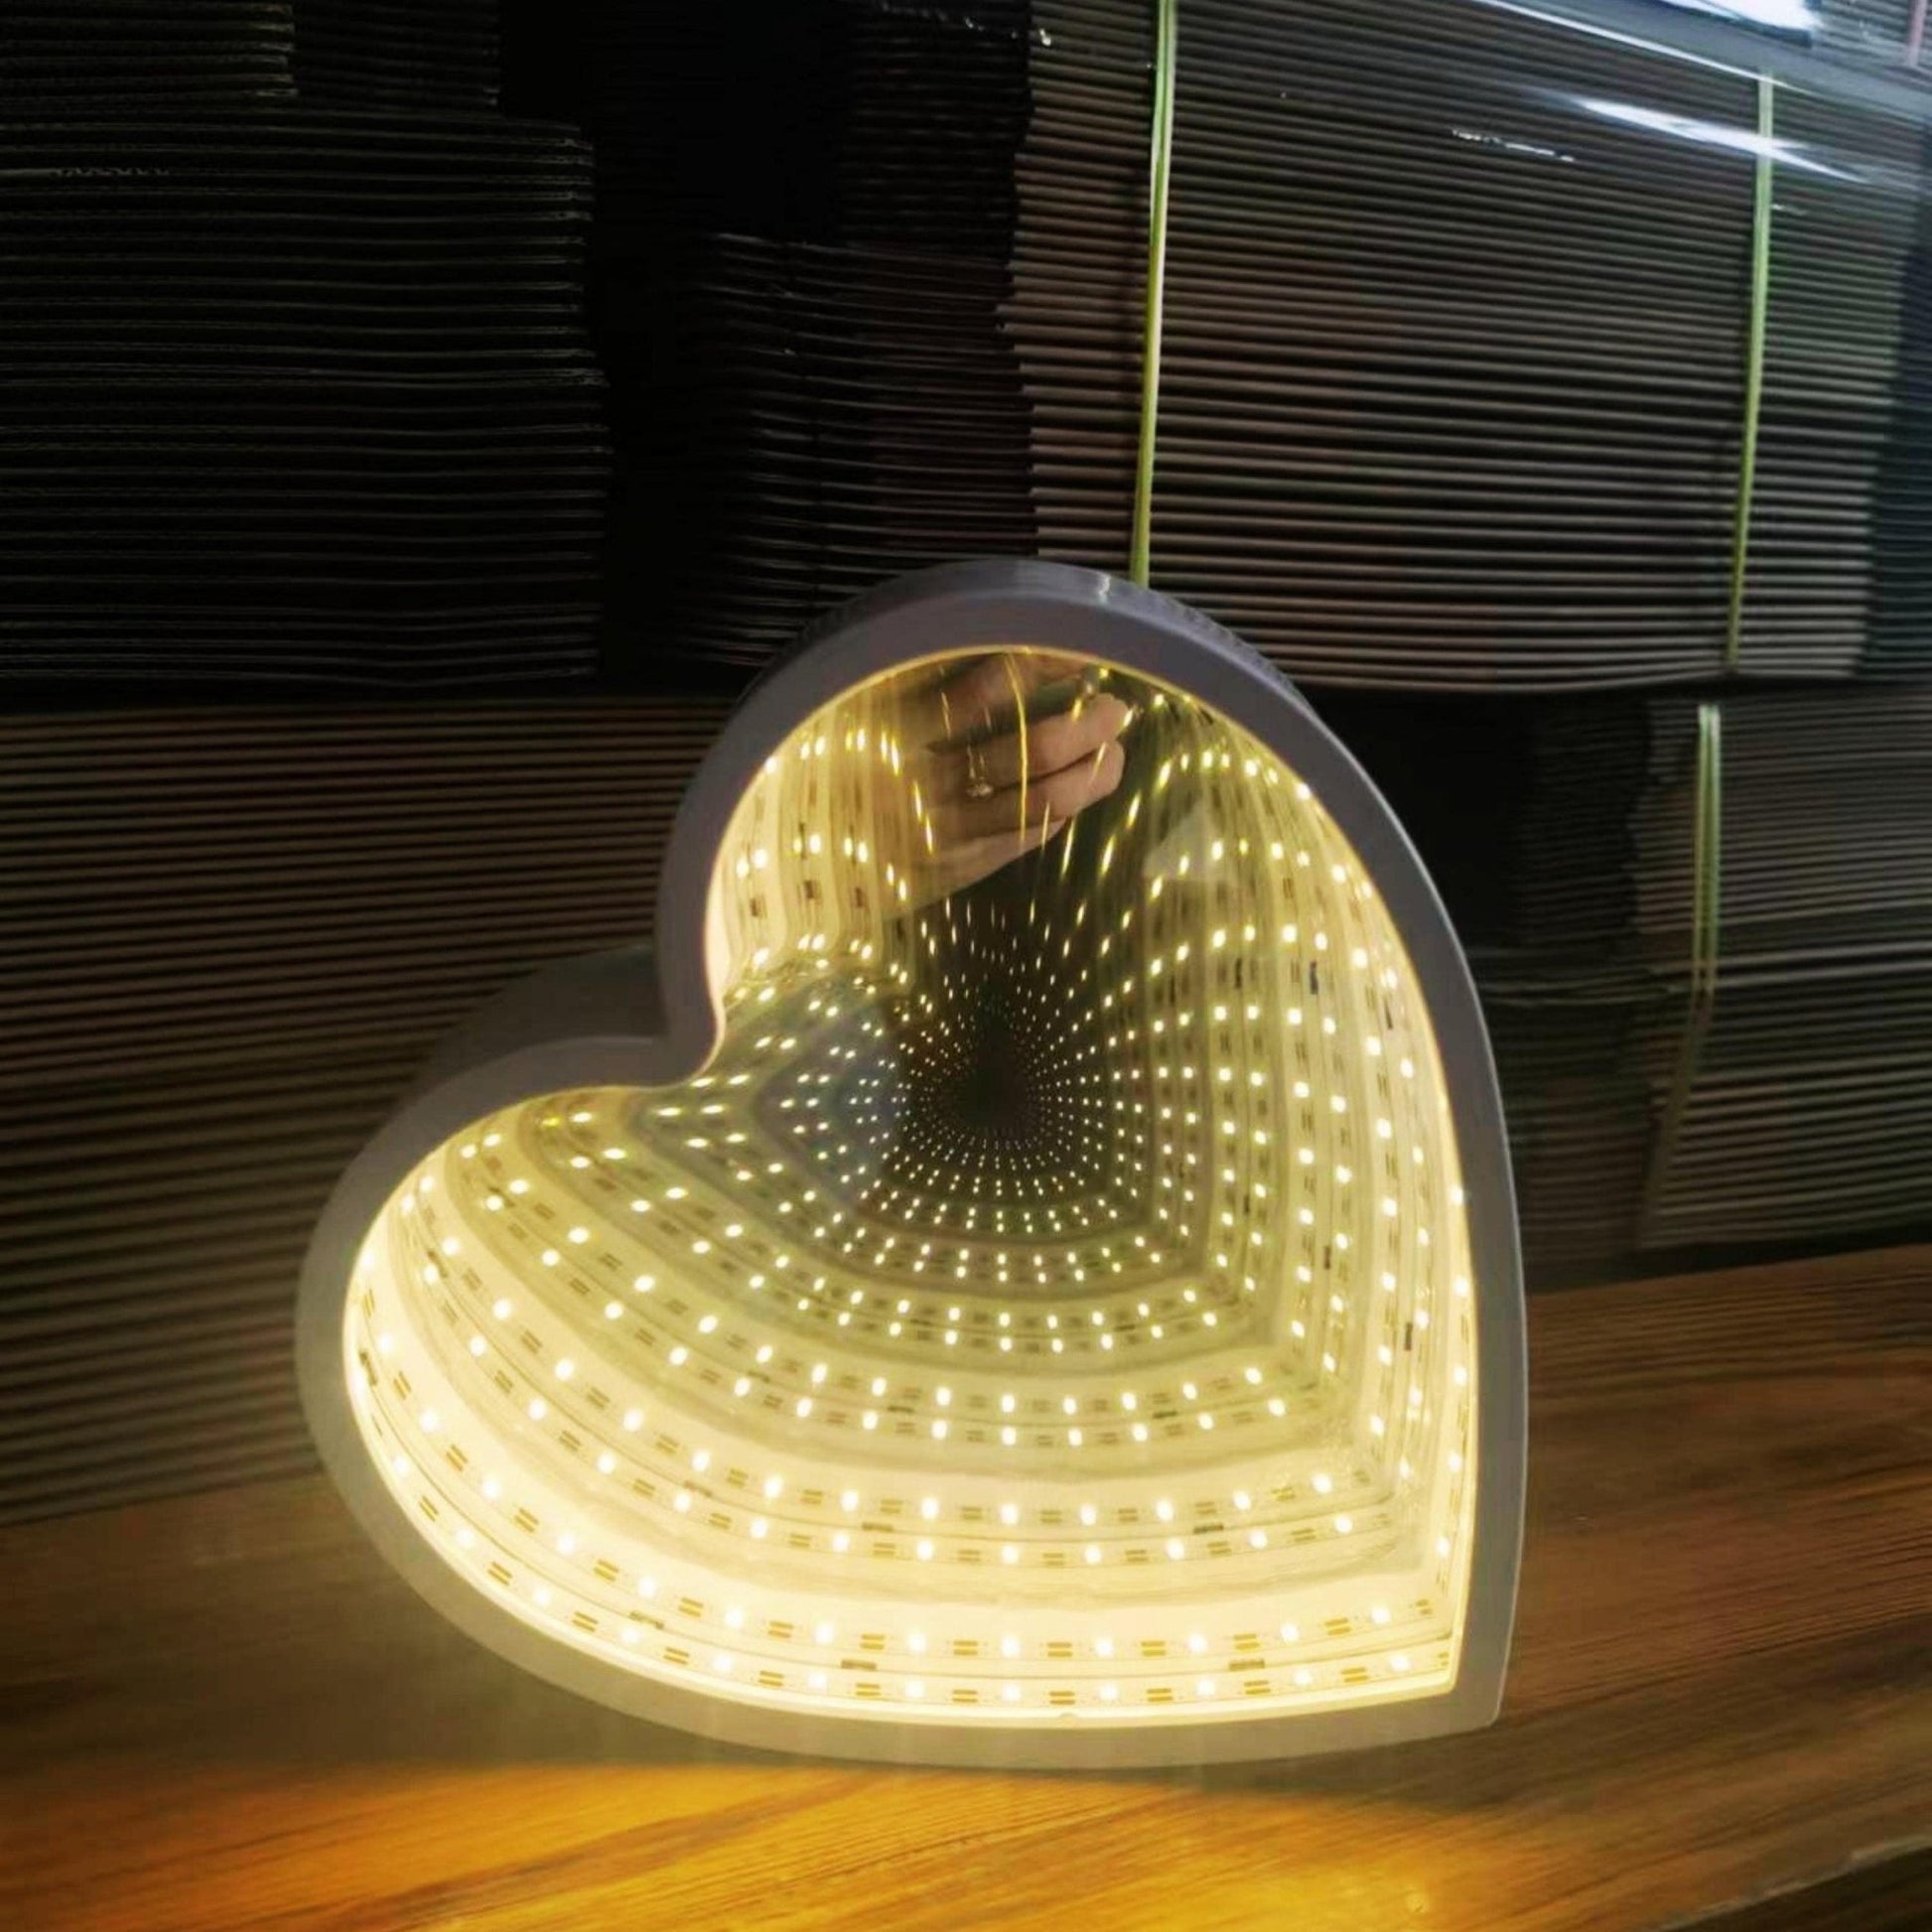 3D Infinity Mirror Tunnel Lights - Space Mesmerise - Space Gifts | Lamps | Statues | Home Decor